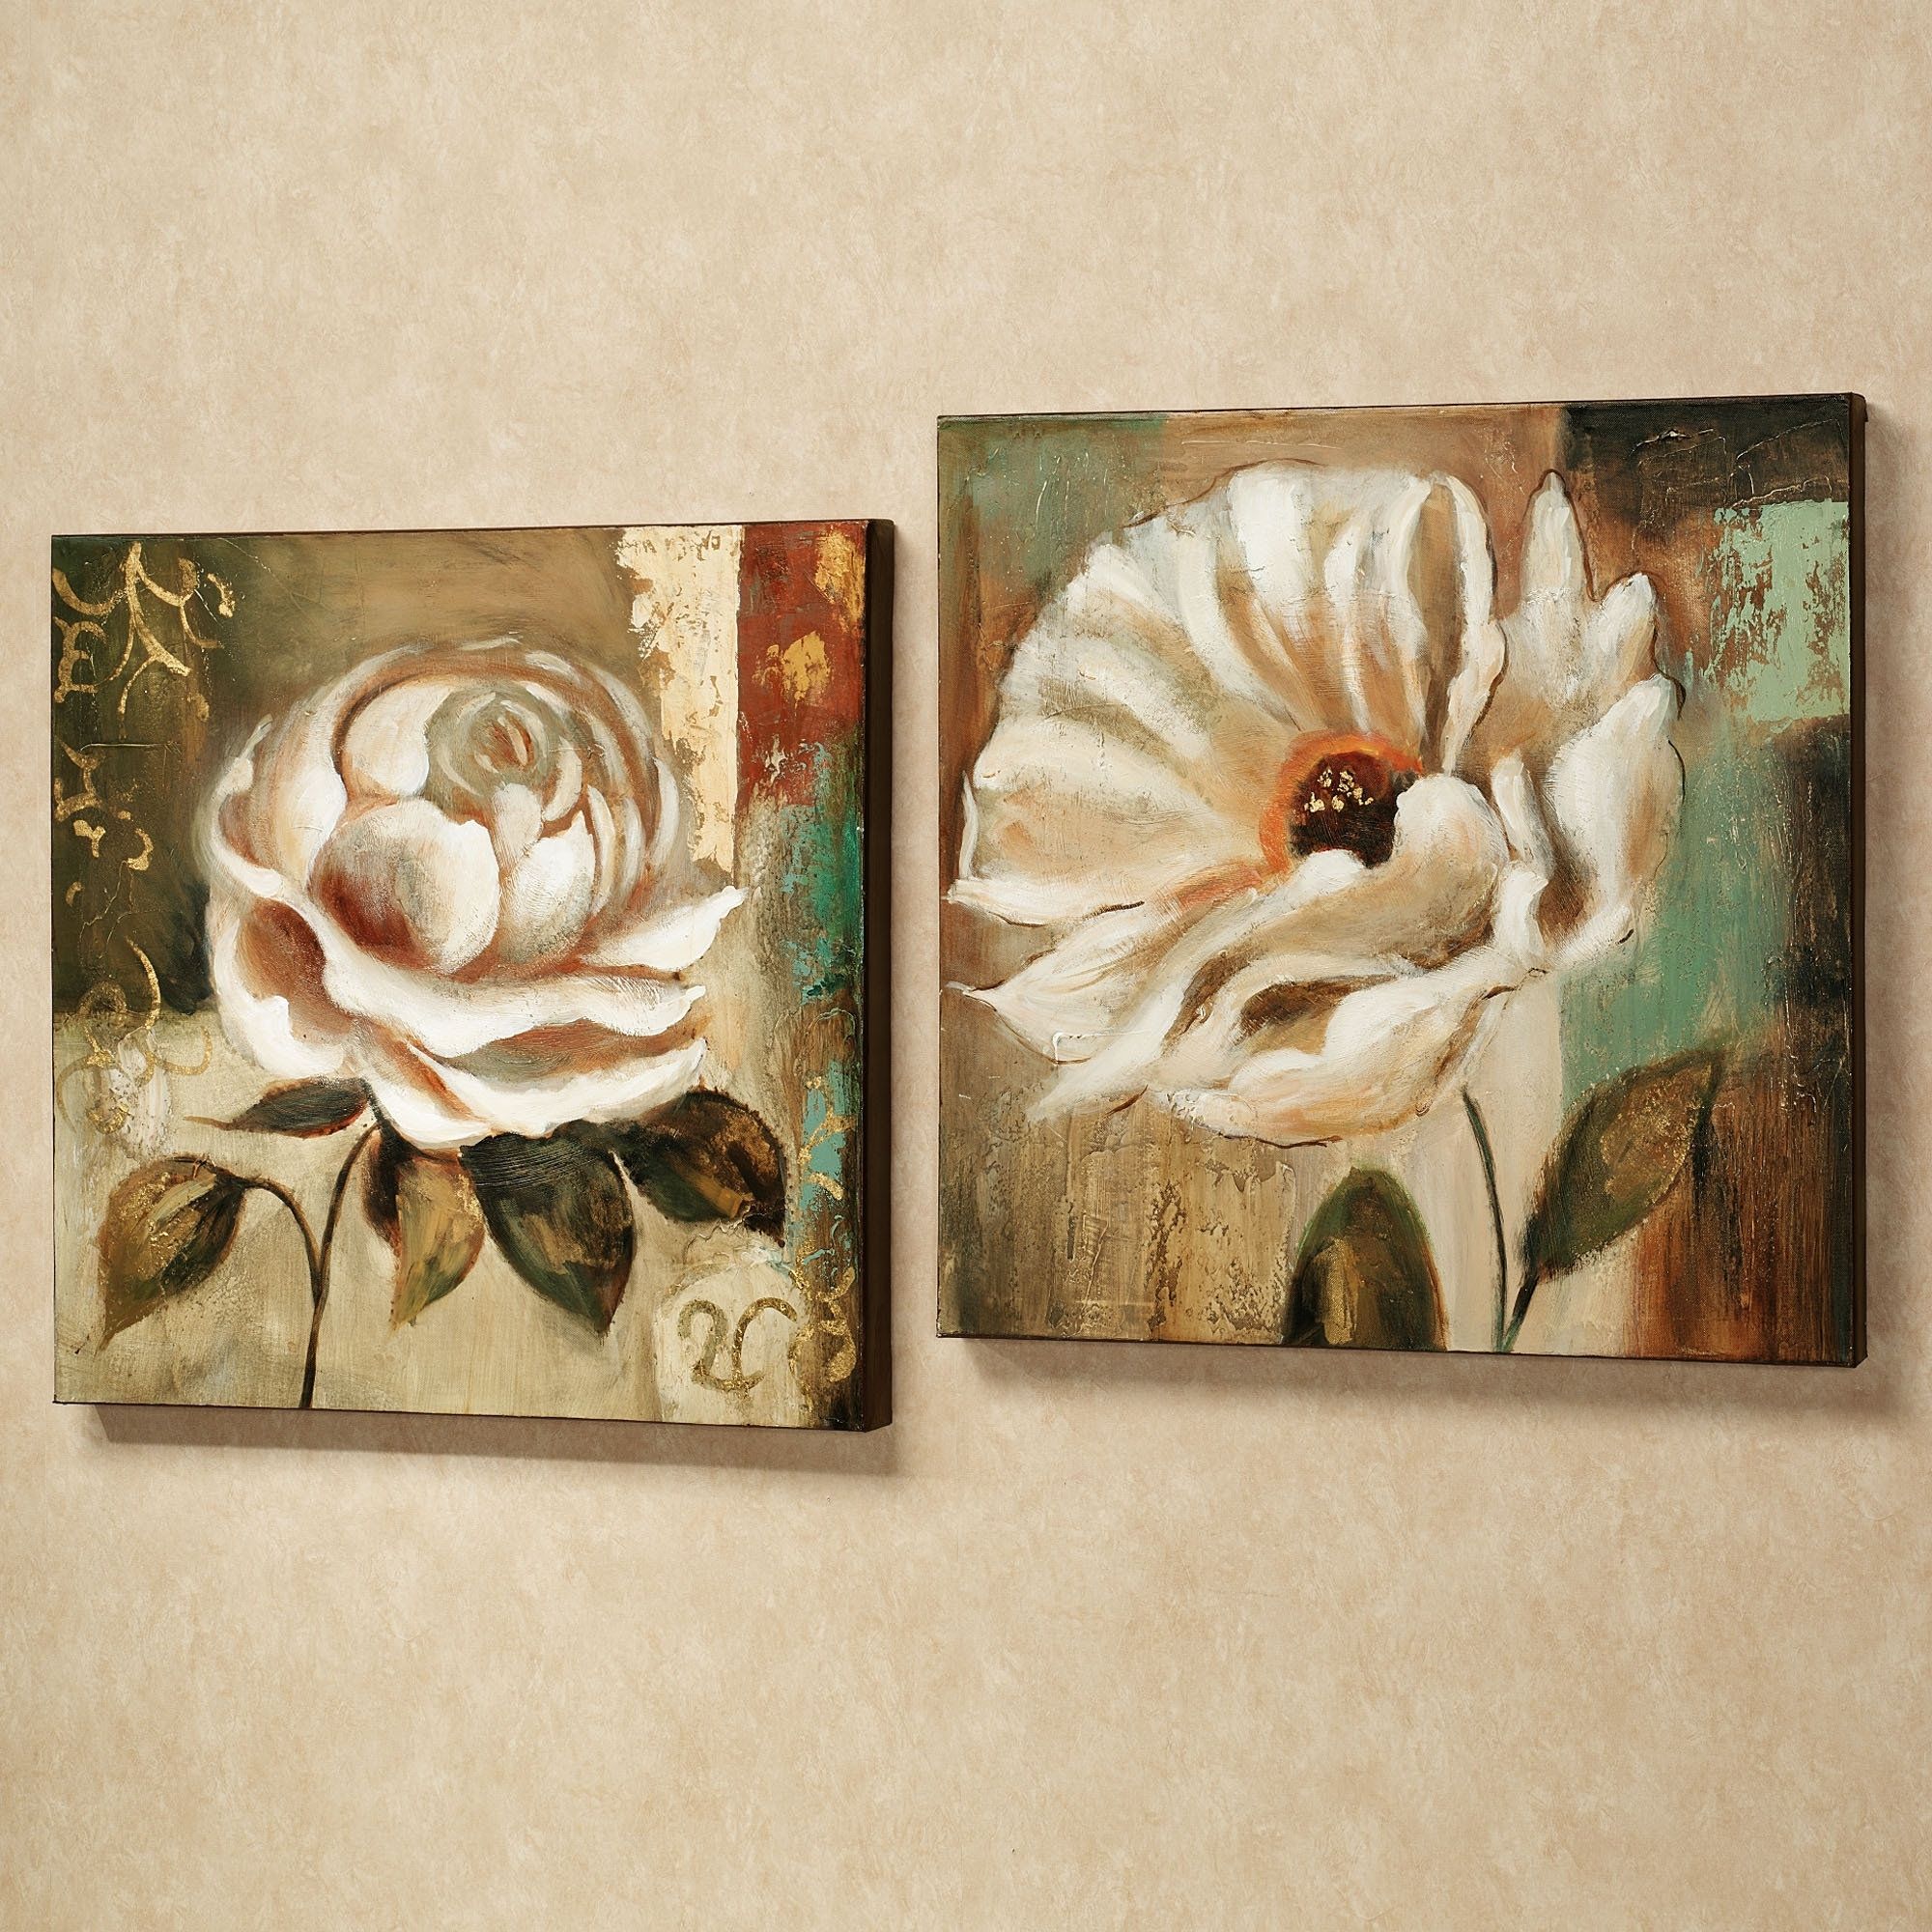 Famous Wall Art Designs: Floral Canvas Wall Art Garden Canvas Floral Wall With Canvas Wall Art Of Flowers (View 8 of 15)